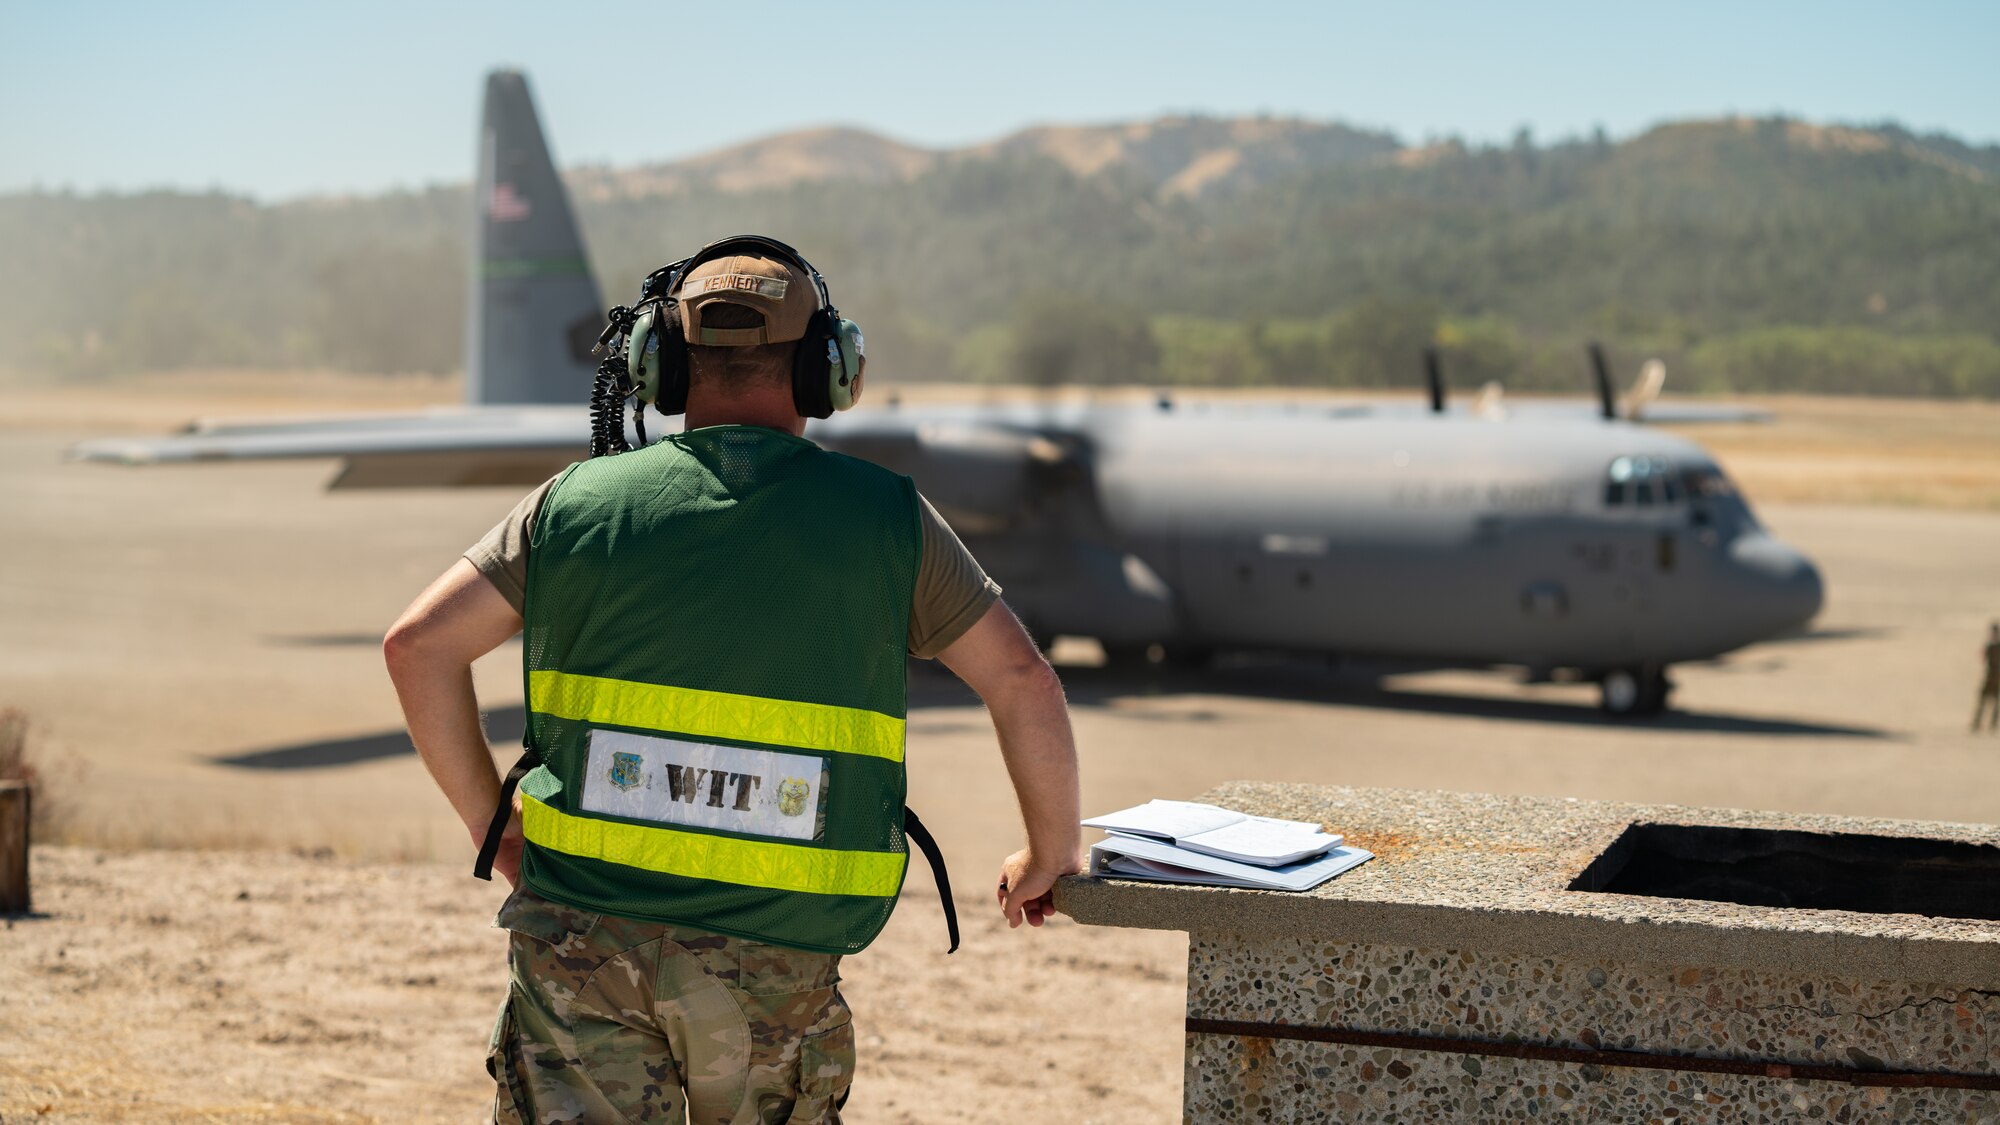 A California Air National Guard C-130J Super Hercules aircraft assigned to the 115th Airlift Squadron prepares to depart on a tactical runway during an exercise at Schoonover Airfield, Fort Hunter Liggett, California, Sept. 9, 2023. The exercise, also known as Crisis Beach II, was a multi-day exercise to evaluate the 146th Airlift Wing's ability to deploy, adapt, and survive in a contested environment. Airmen participating implemented many skill sets shared from other career fields to demonstrate their ability to execute the Agile Combat Employment (ACE) model, highlighting their proactive and reactive operational strategies under simulated threat timelines in order to increase survivability while generating combat power. (U.S. Air National Guard photo by Maj. Andrei Mostovoj)